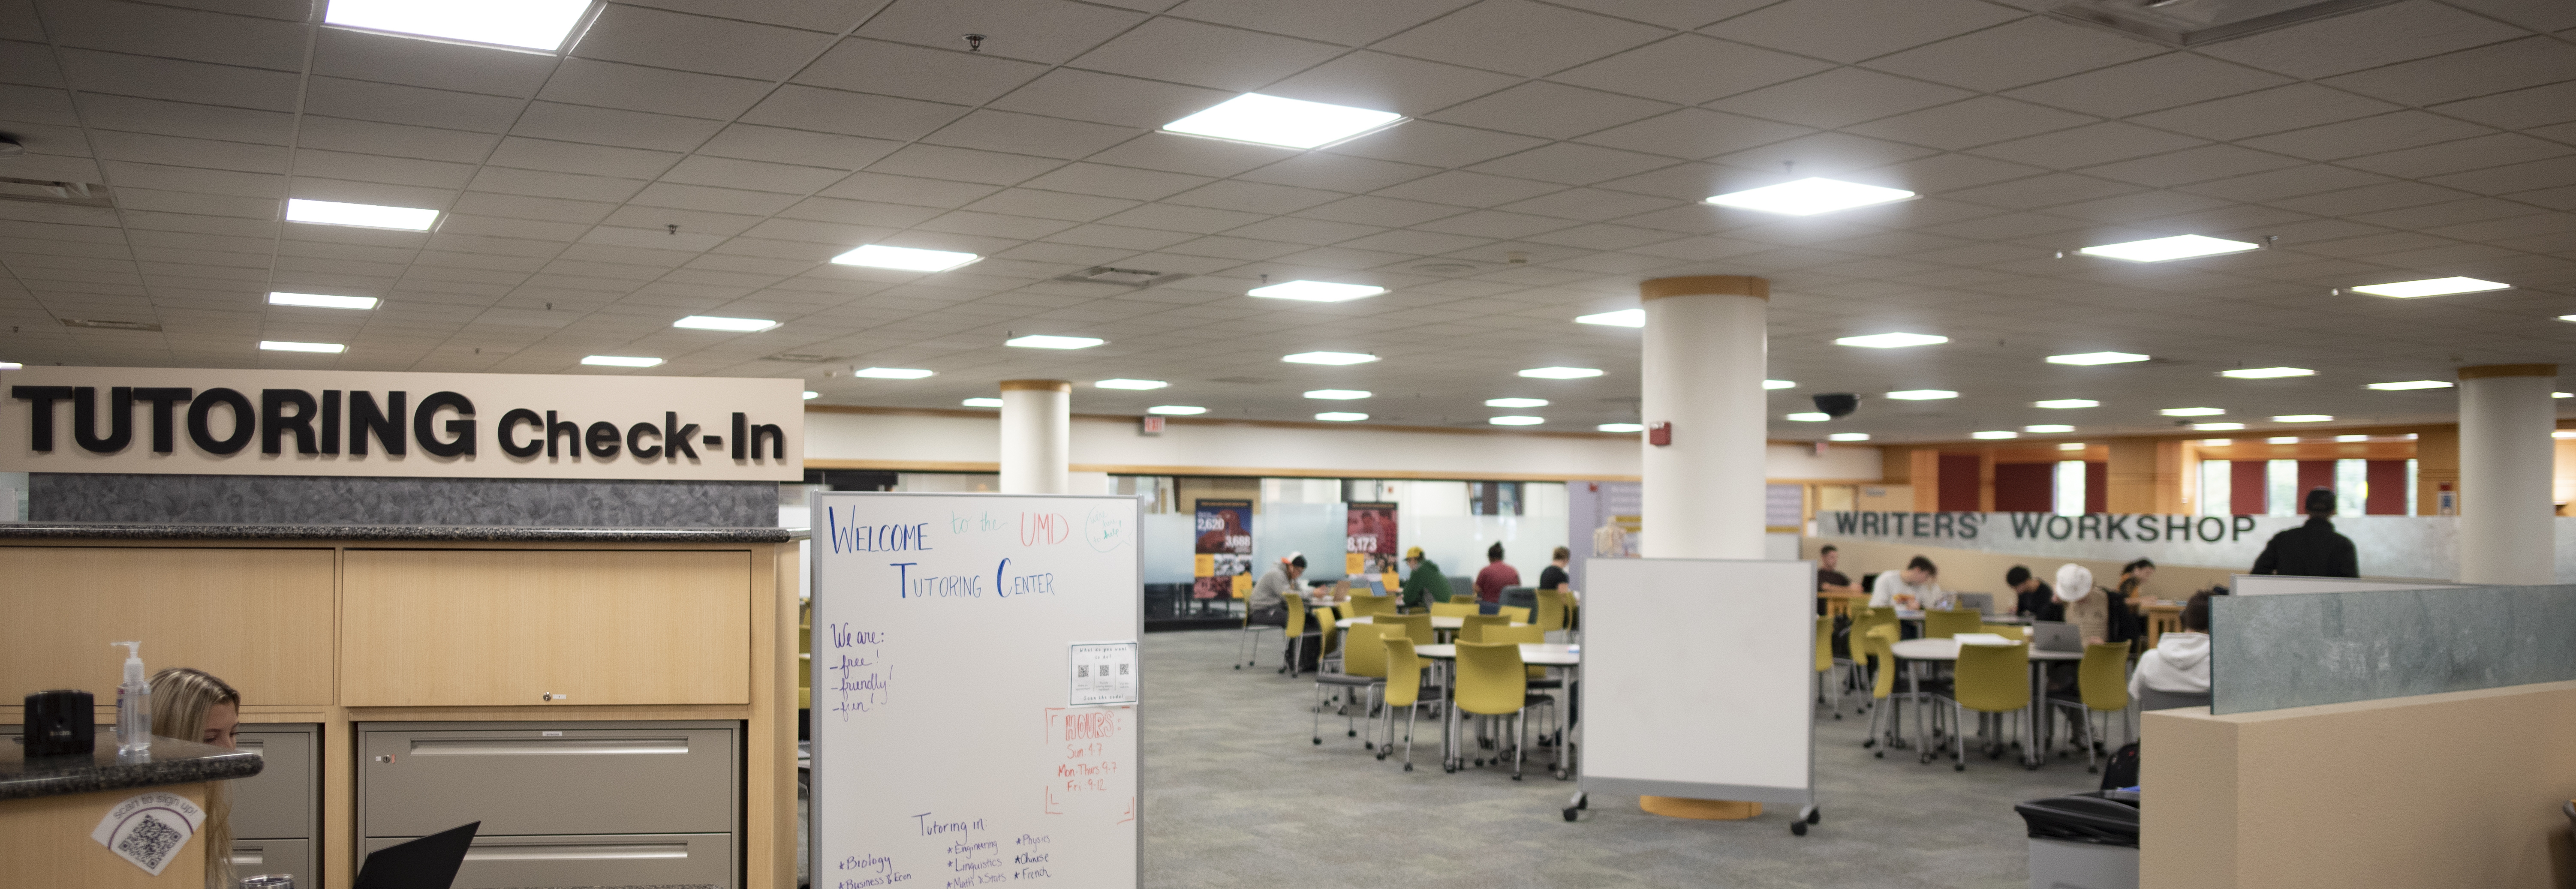 photo of an brightly-lit space full of tables in the library, tutoring center on one side, writers' workshop on the other